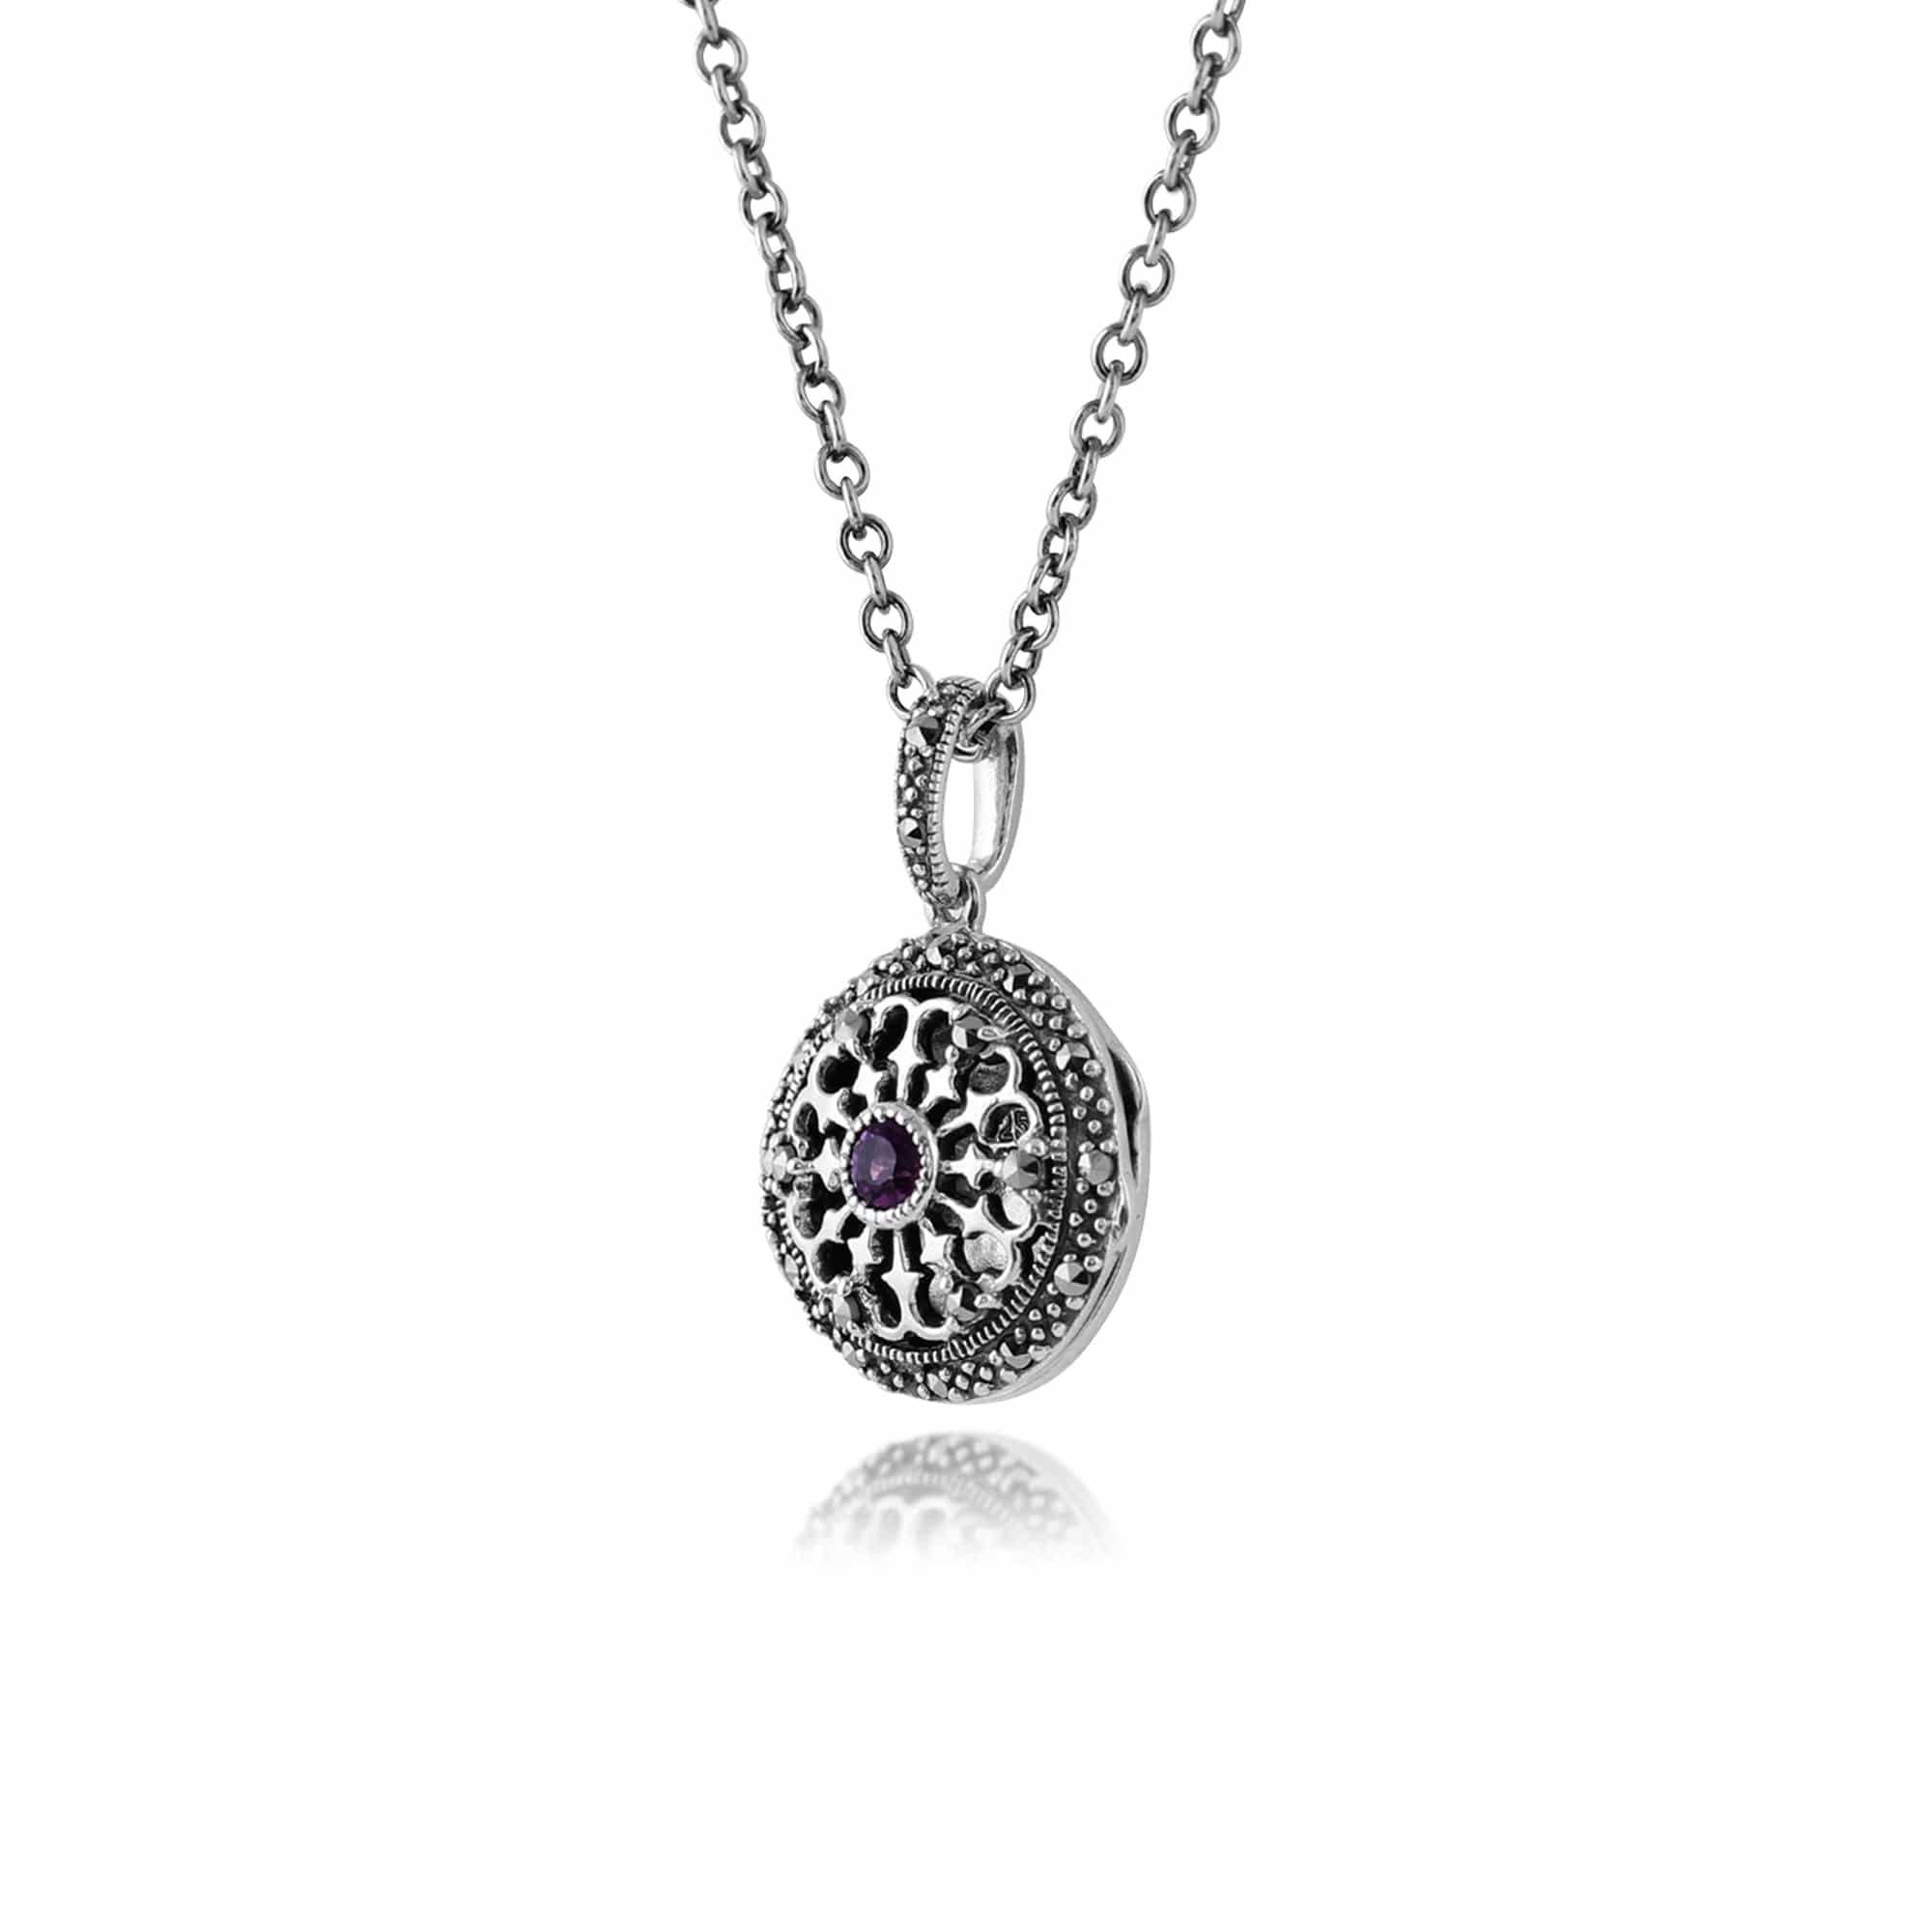 214N551101925 Art Nouveau Style Round Amethyst & Marcasite Locket on Chain in 925 Sterling Silver 2